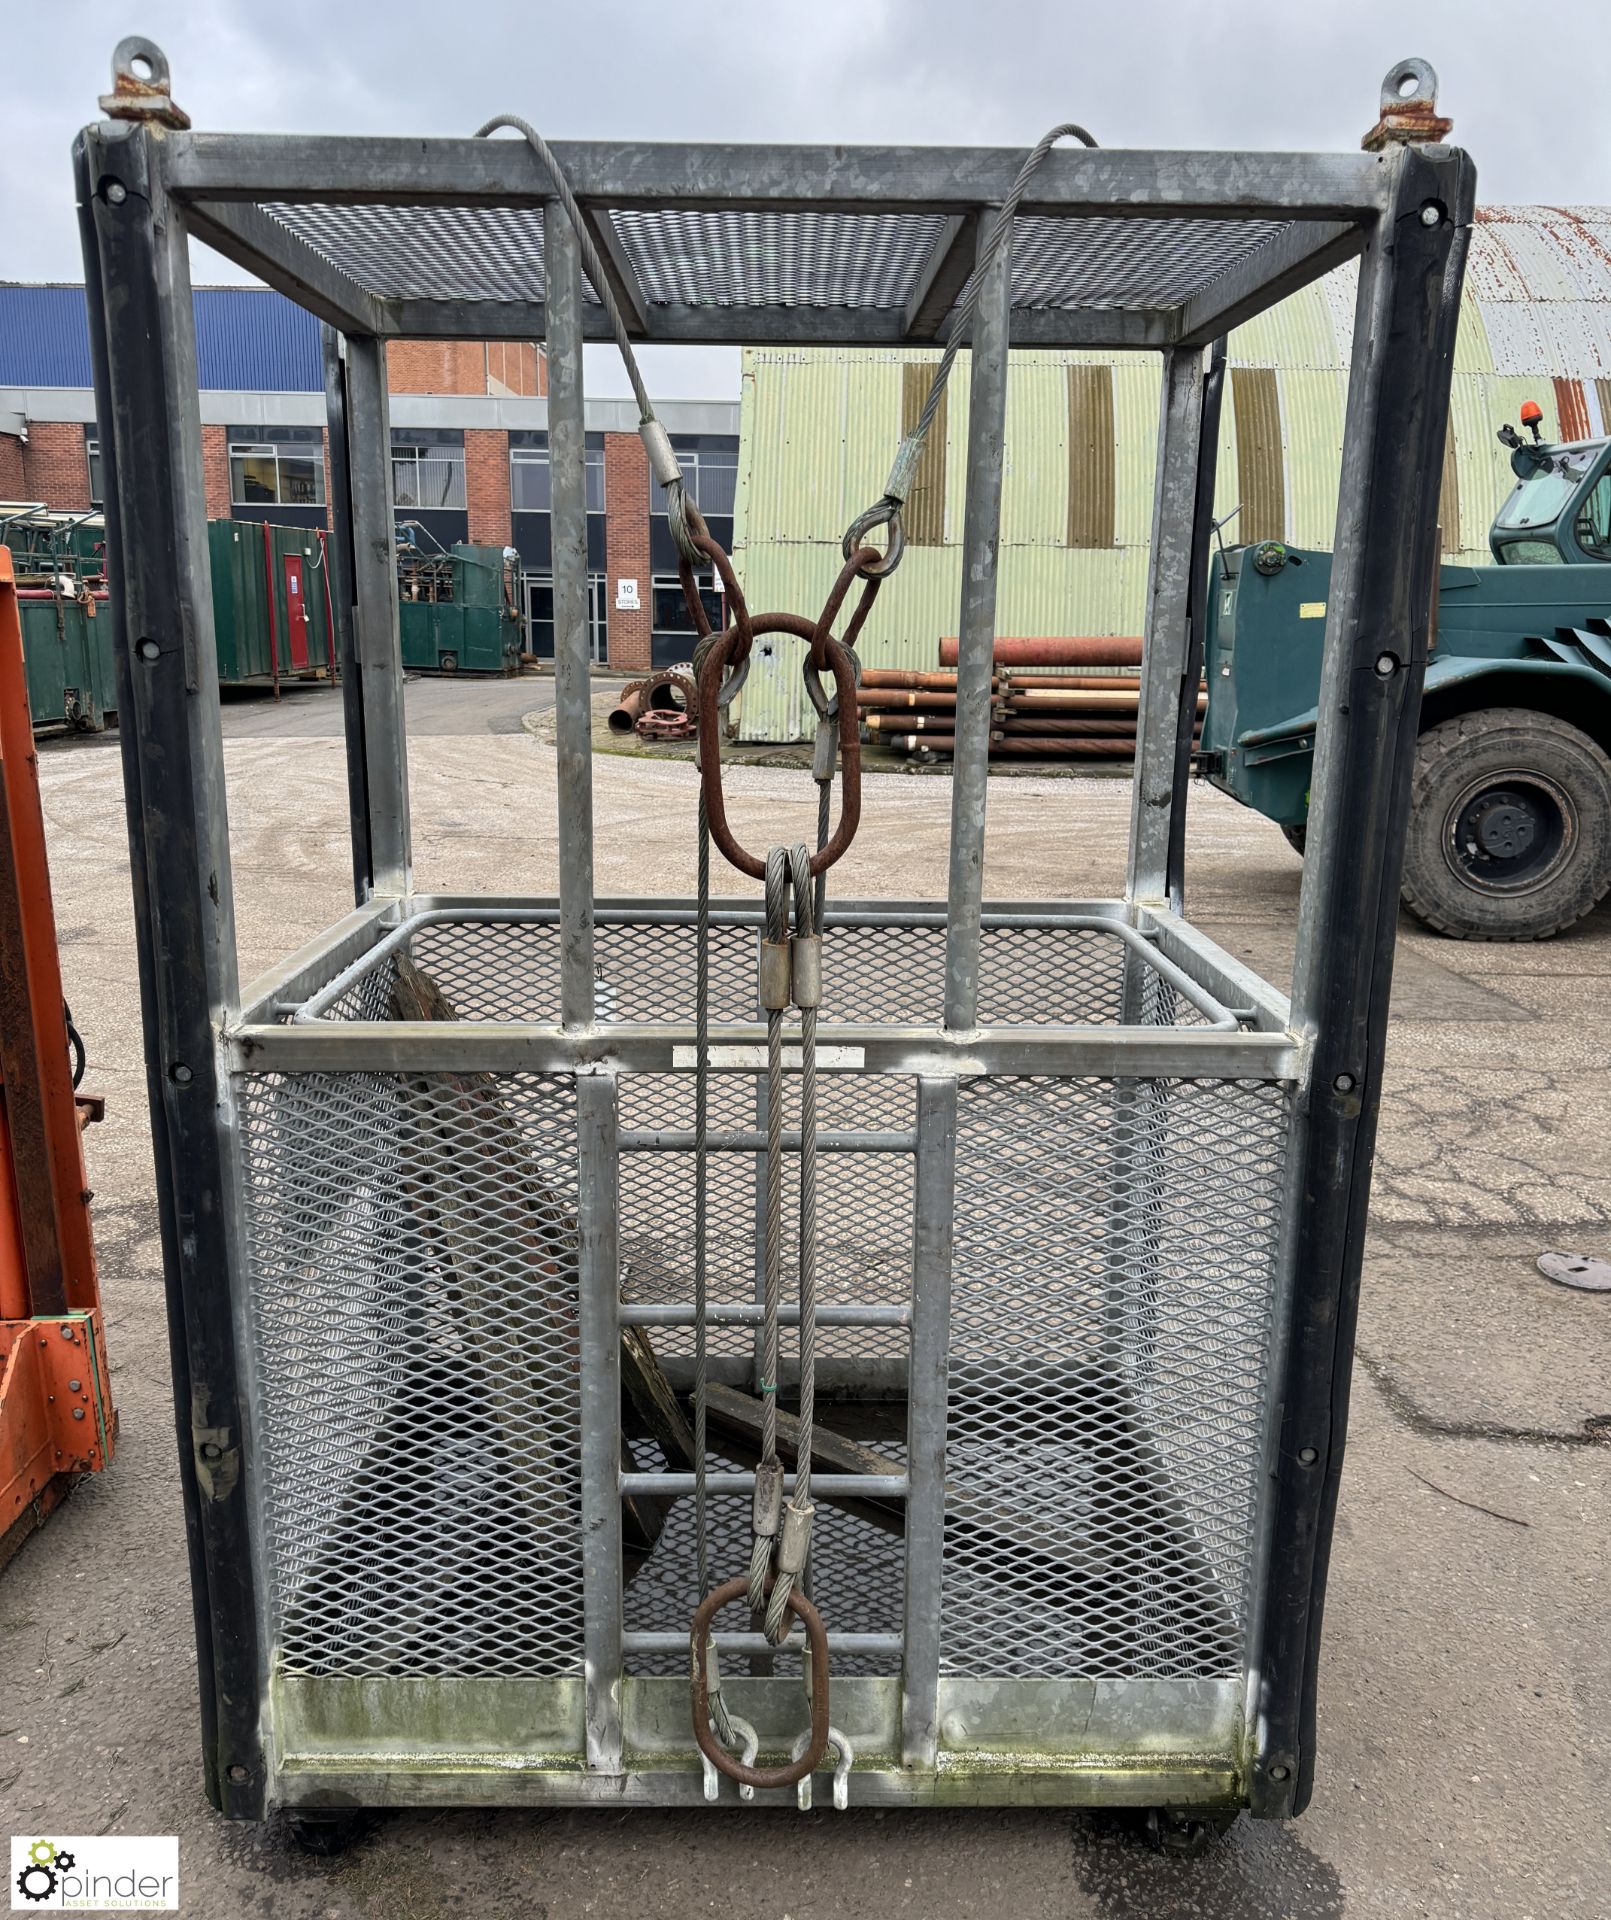 Crane type Man Lift Cage, swl 500kg, 3 person, 1500mm x 1000mm x 2300mm - Image 3 of 4